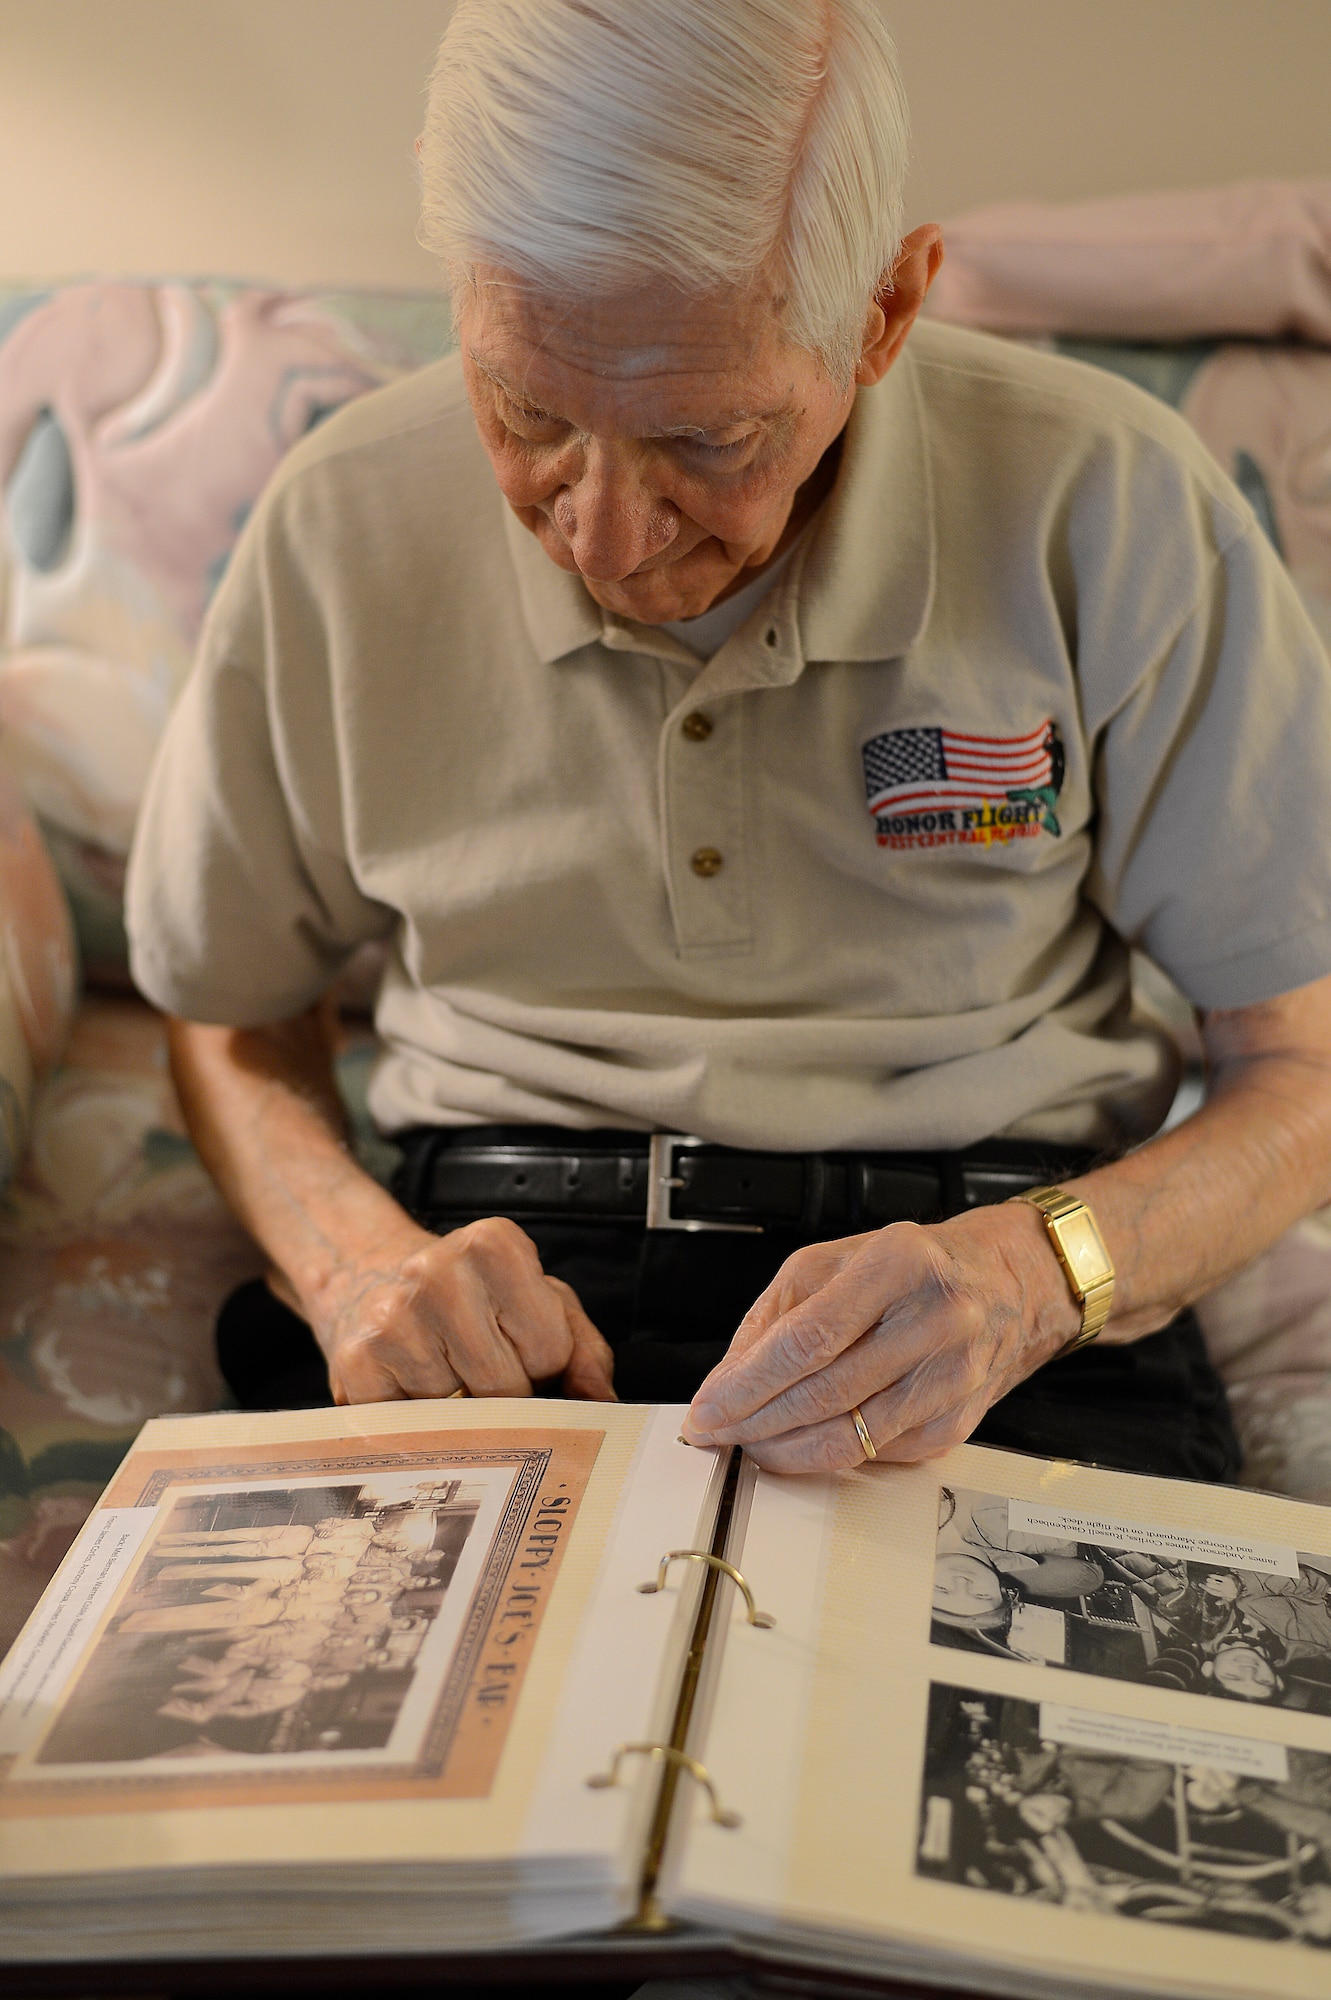 Russell Gackenbach, former B-29 Superfortress navigator, looks through a photo album, Feb 10, 2015, Clearwater, Fla.  Gackenbach was a part of the atomic bomb mission on Hiroshima, Japan on Aug. 6, 1945. (U.S. Air Force photo by Tech. Sgt. Brandon Shapiro/Released).